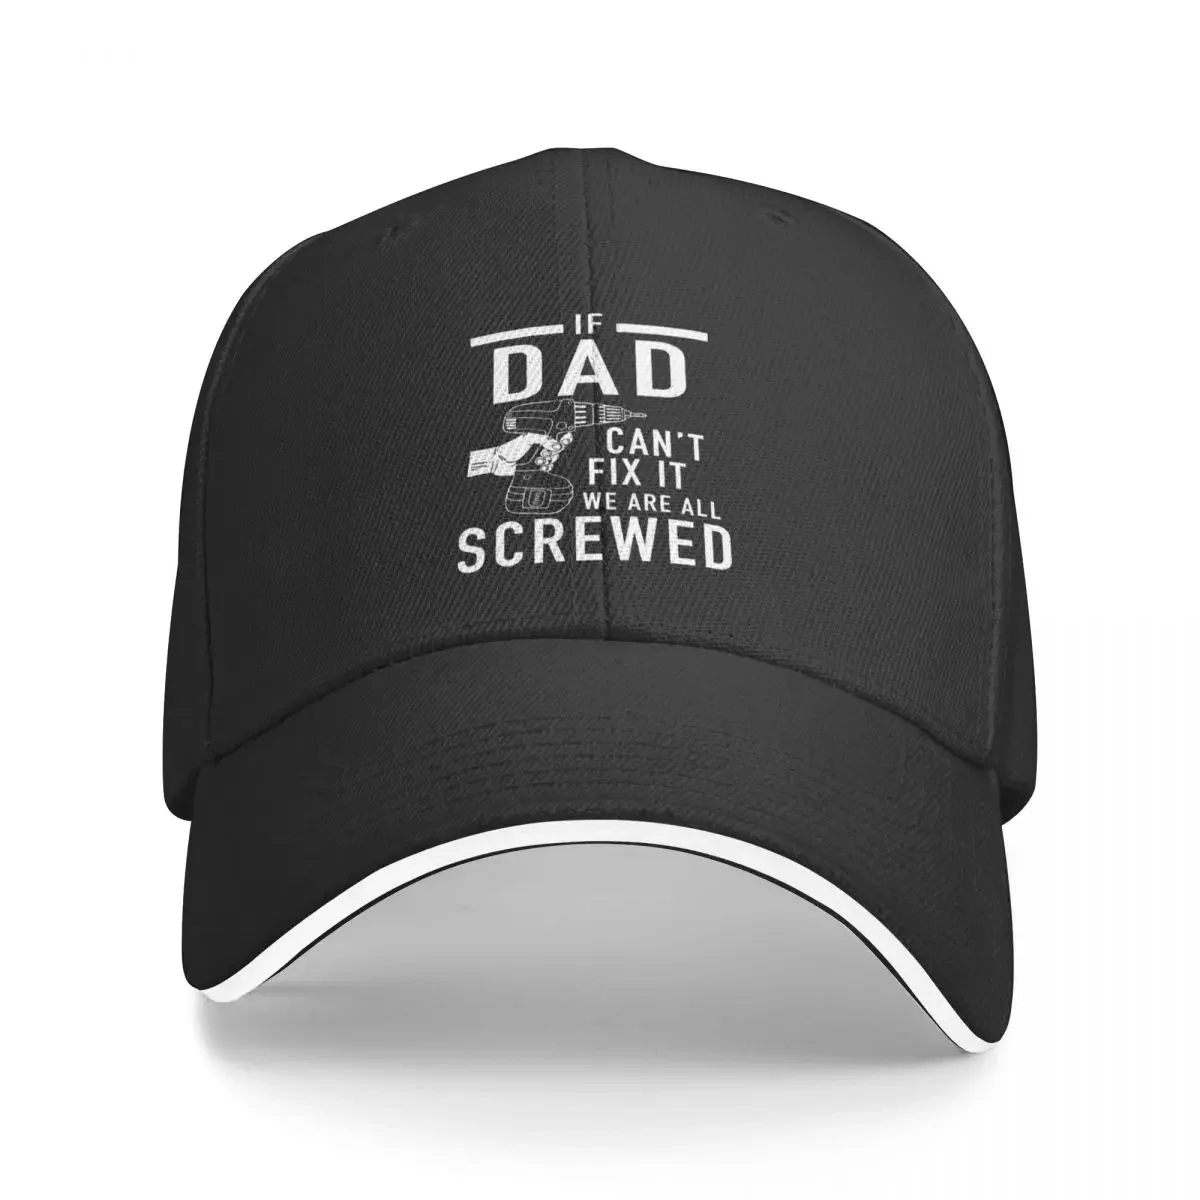 

Funny Father's Day Gift If Dad Can't Fix It We Are All Screwed Baseball Cap Hood fashionable Men Women's